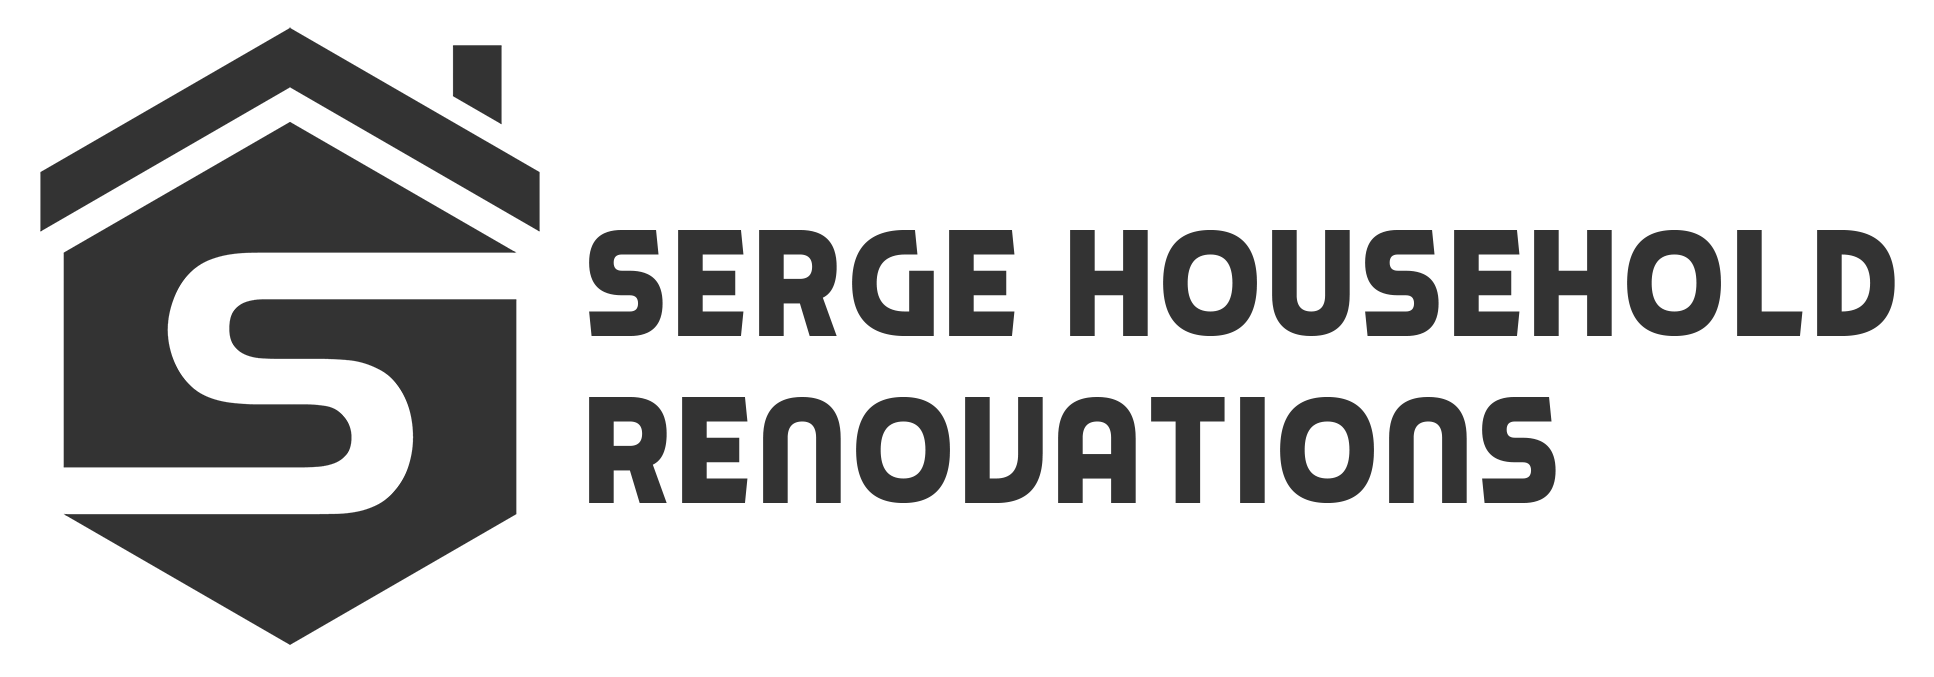 Serge Household Renovations in Bristol & South West Logo